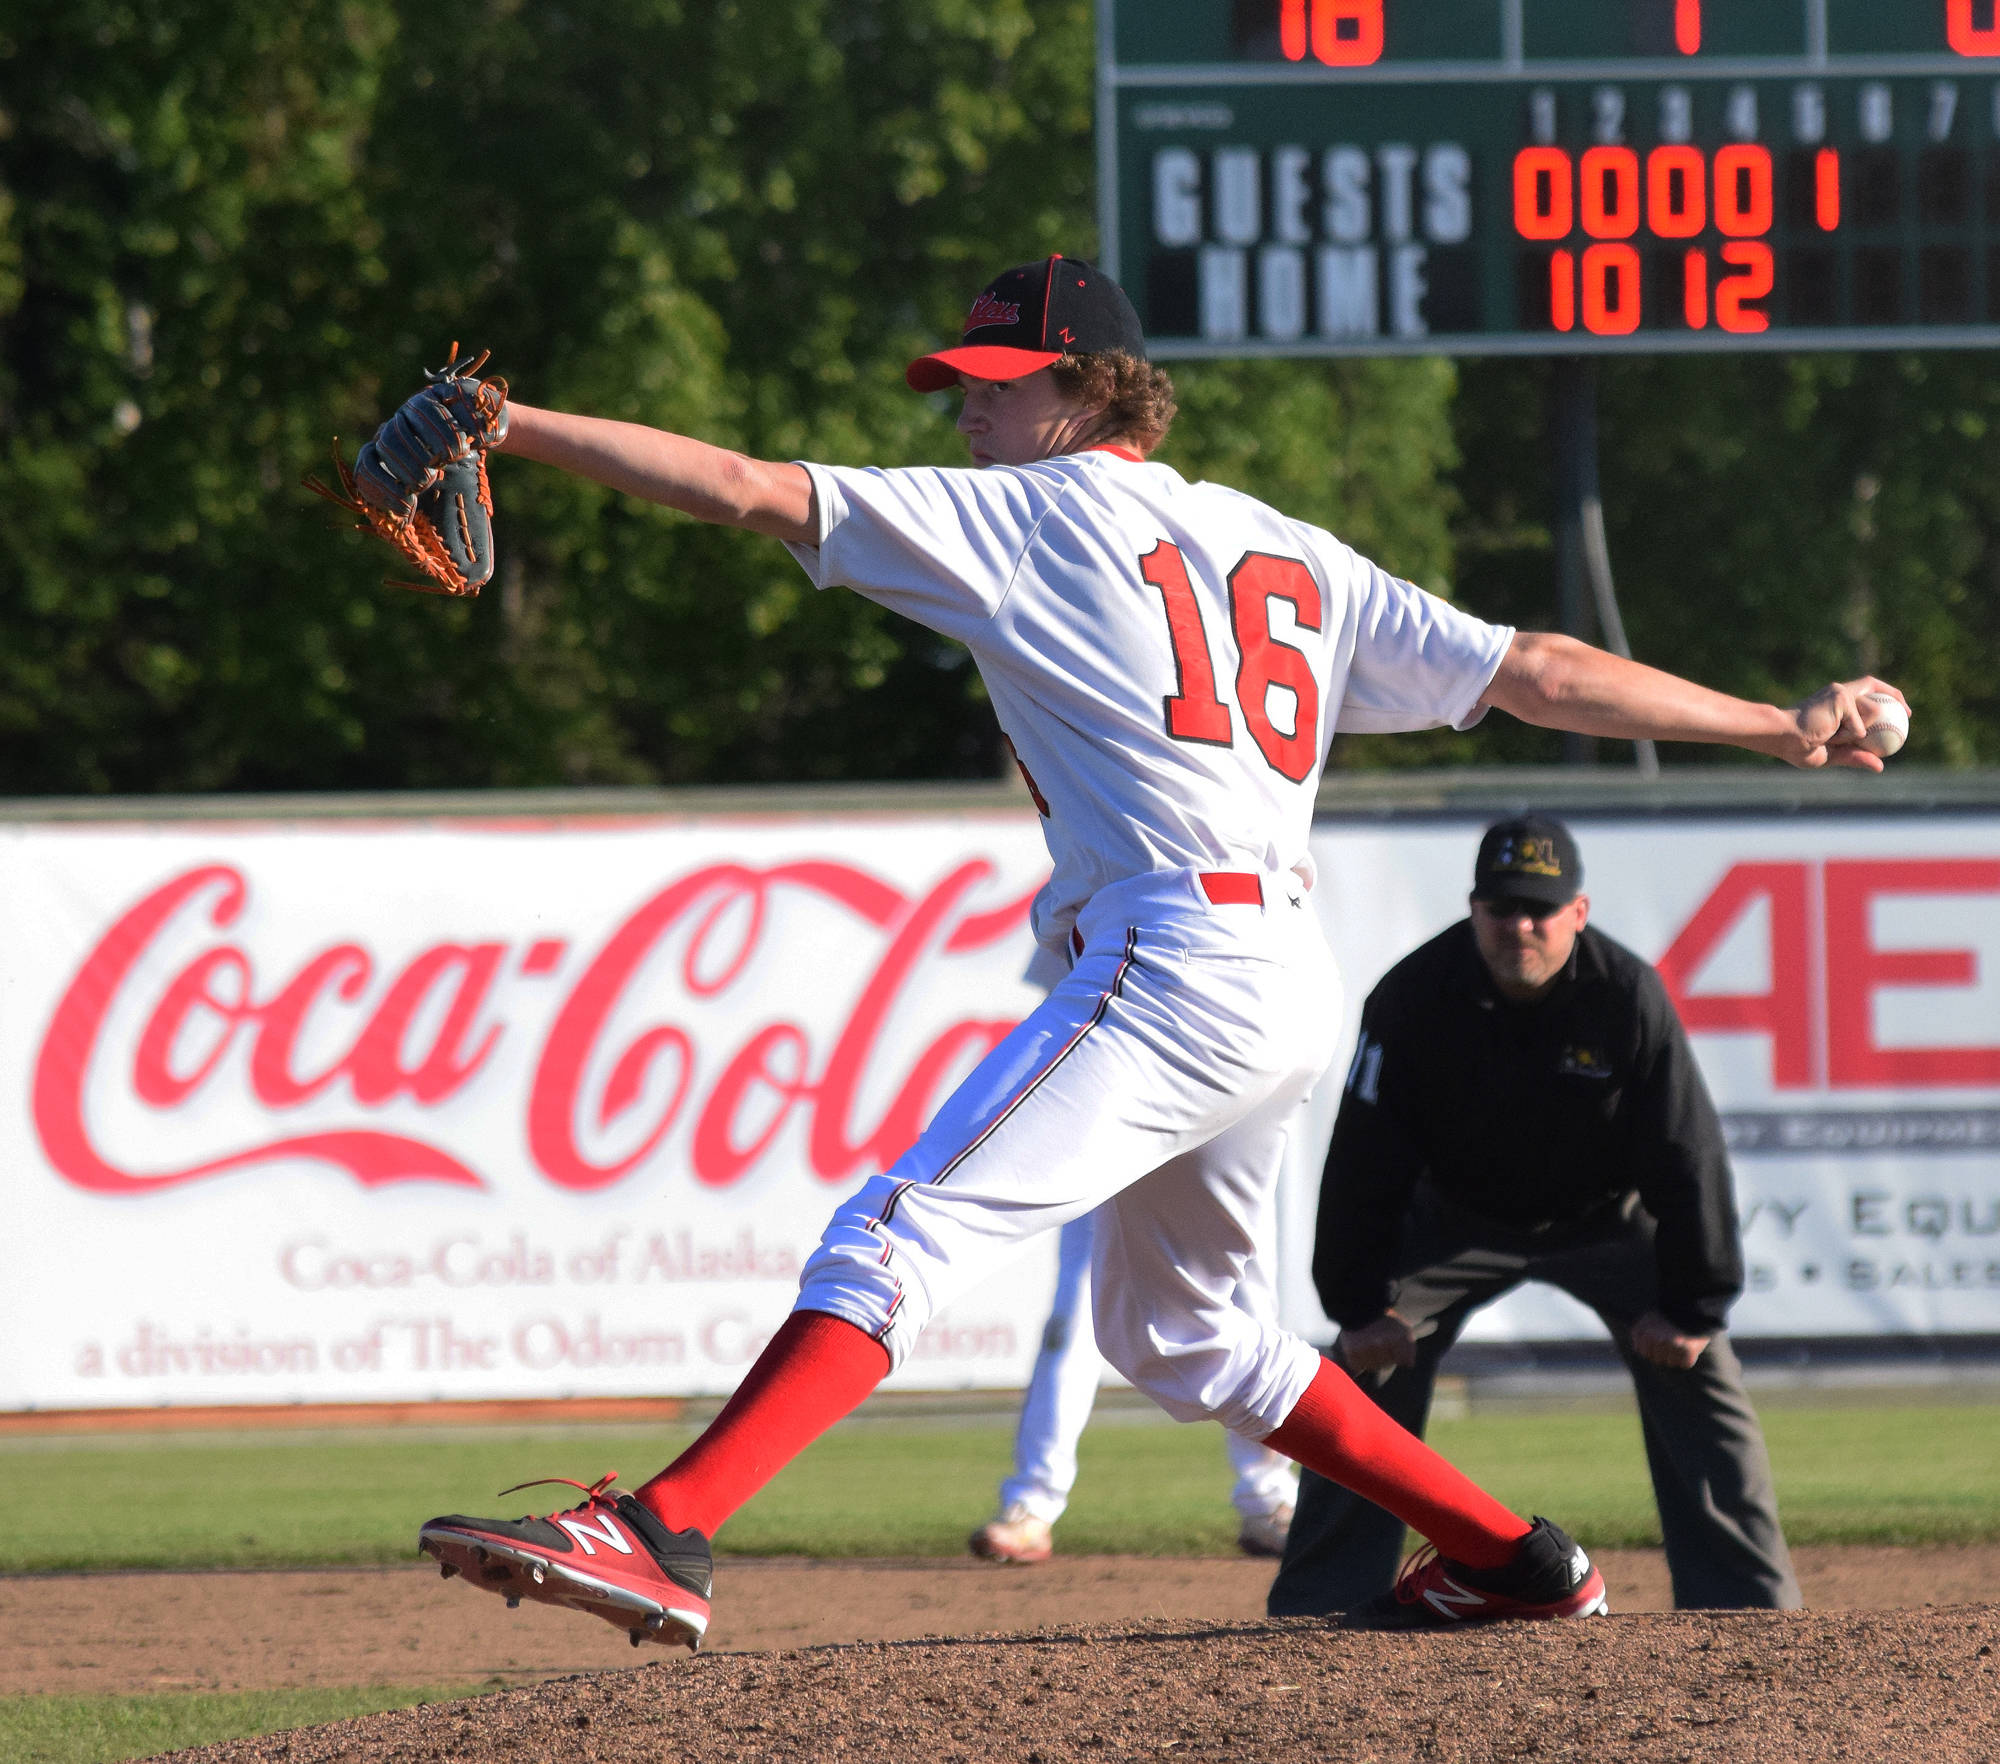 Peninsula Oilers pitcher and 2016 Soldotna High School graduate Joey Becher offers up a pitch to the Anchorage Glacier Pilots midway through Saturday’s Alaska Baseball League contest at Coral Seymour Memorial Ballpark in Kenai. (Photo by Joey Klecka/Peninsula Clarion)